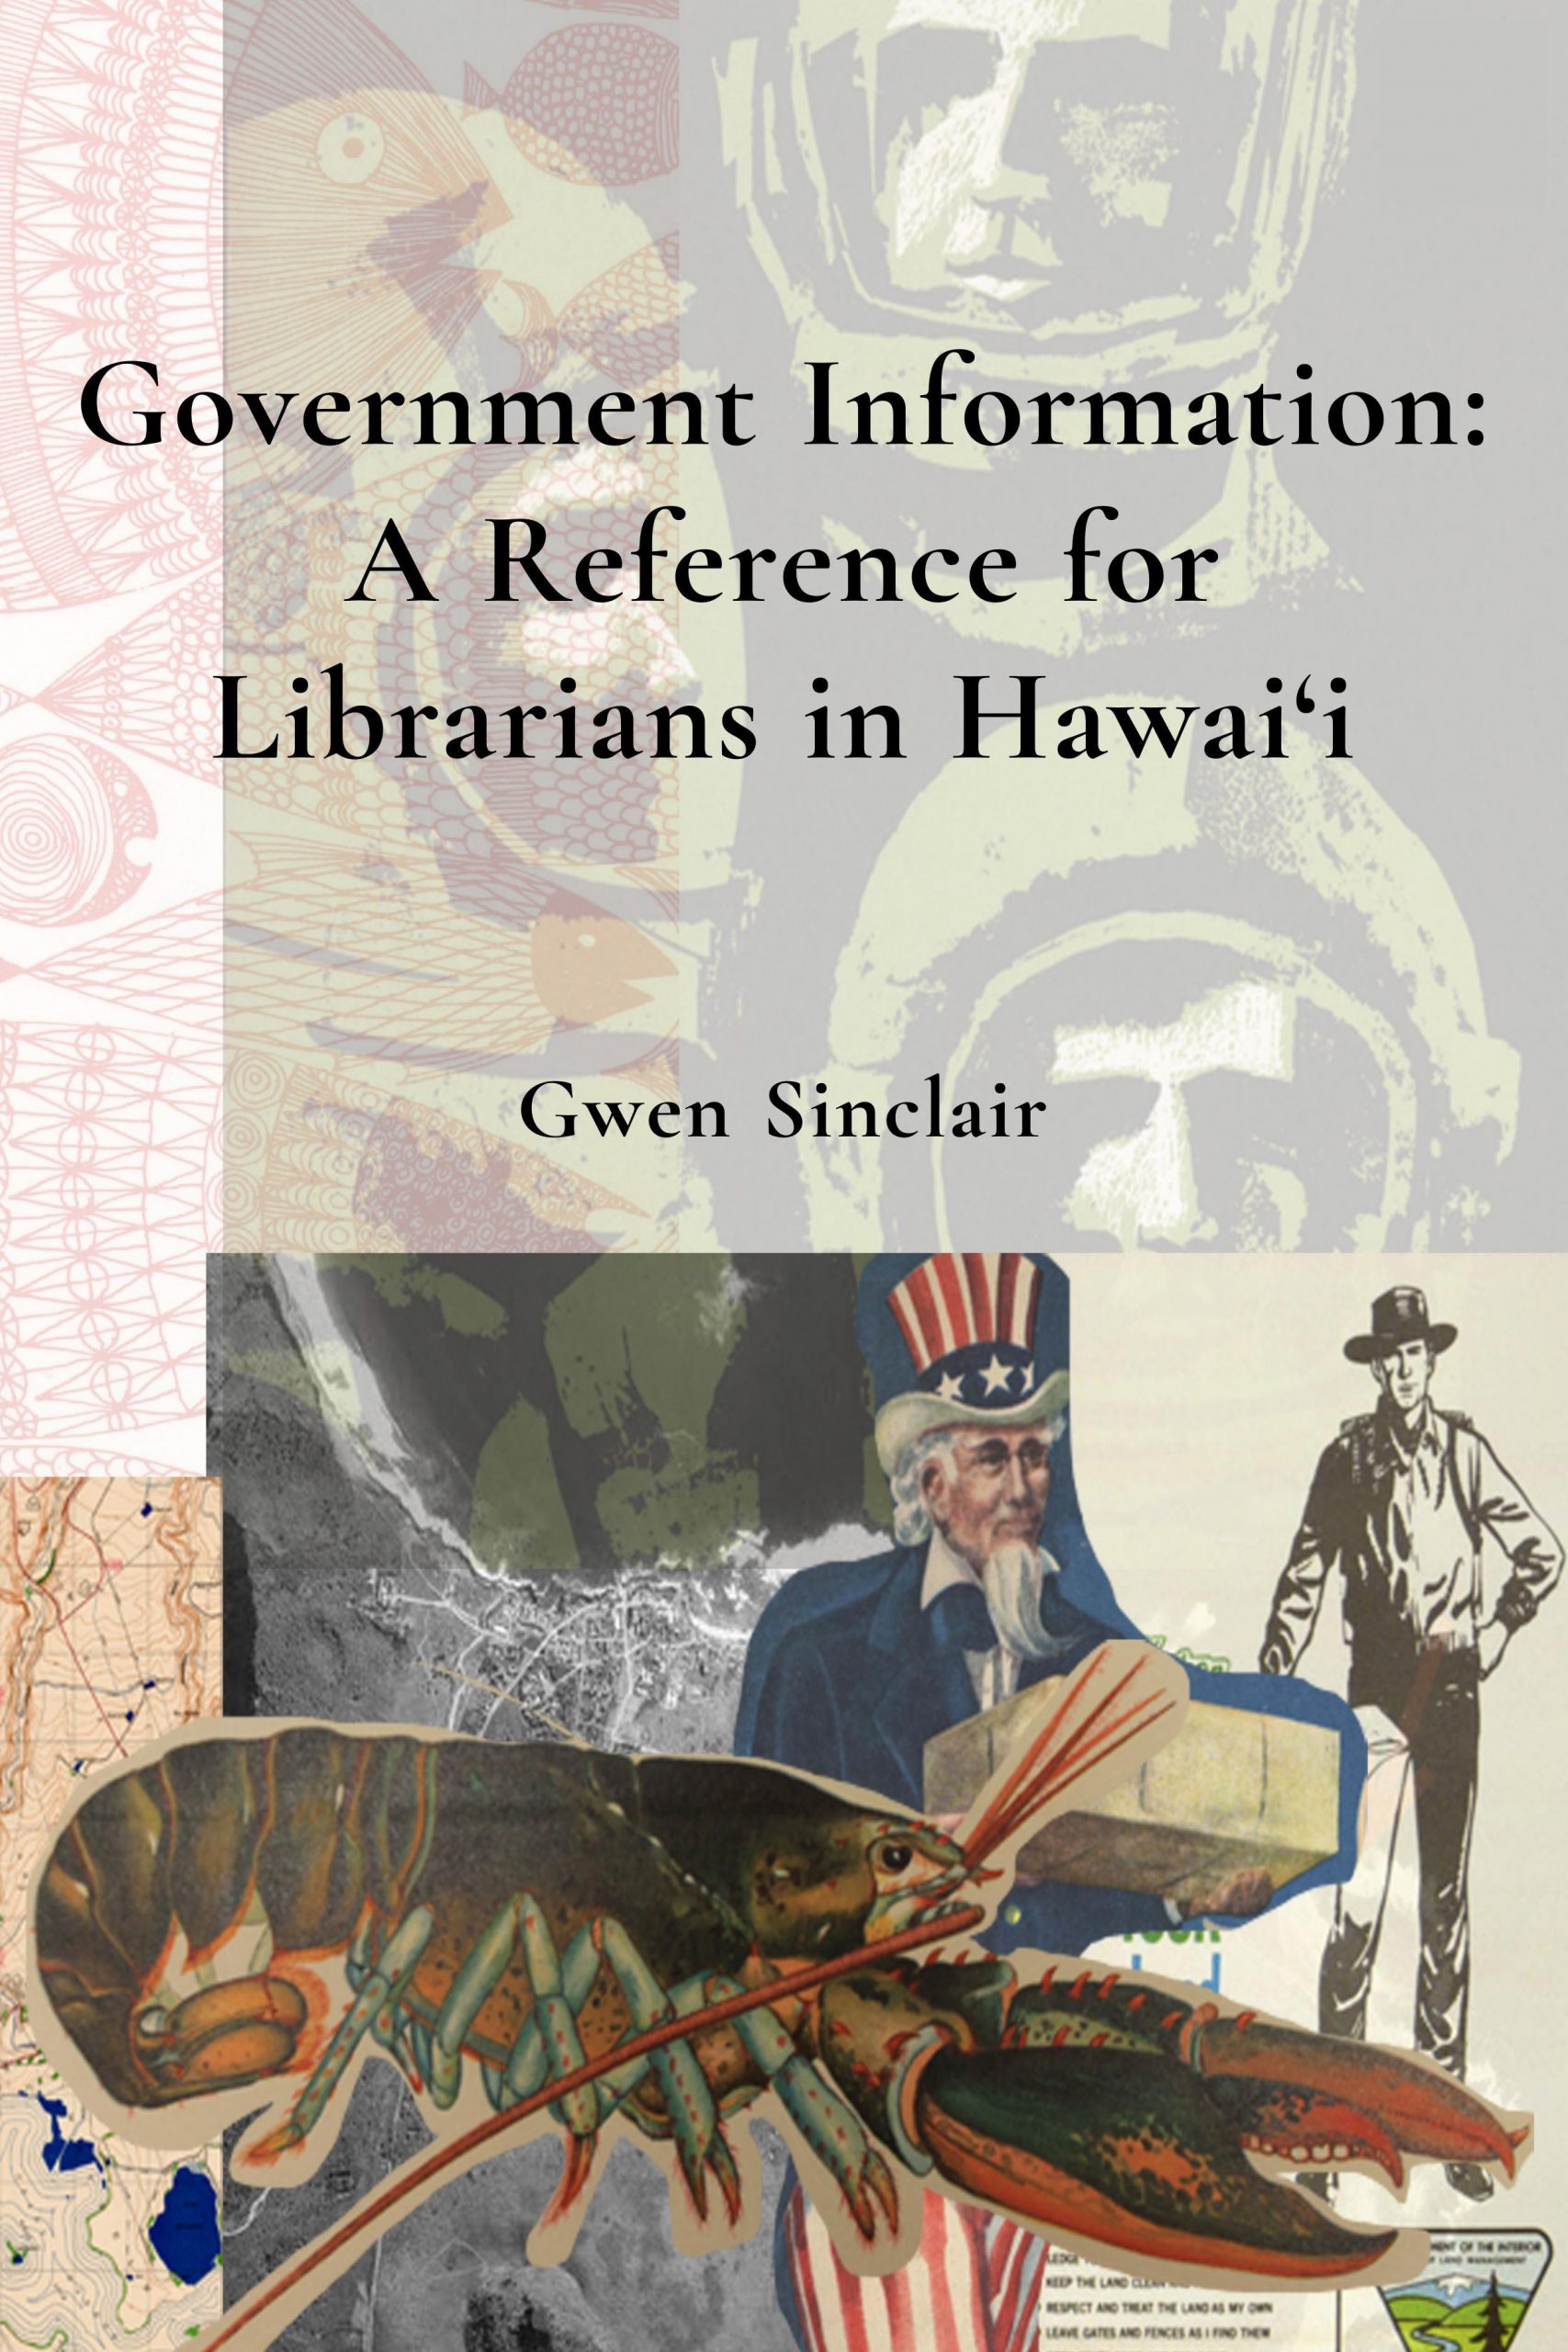 Government Information: A Reference for Librarians in Hawai‘i